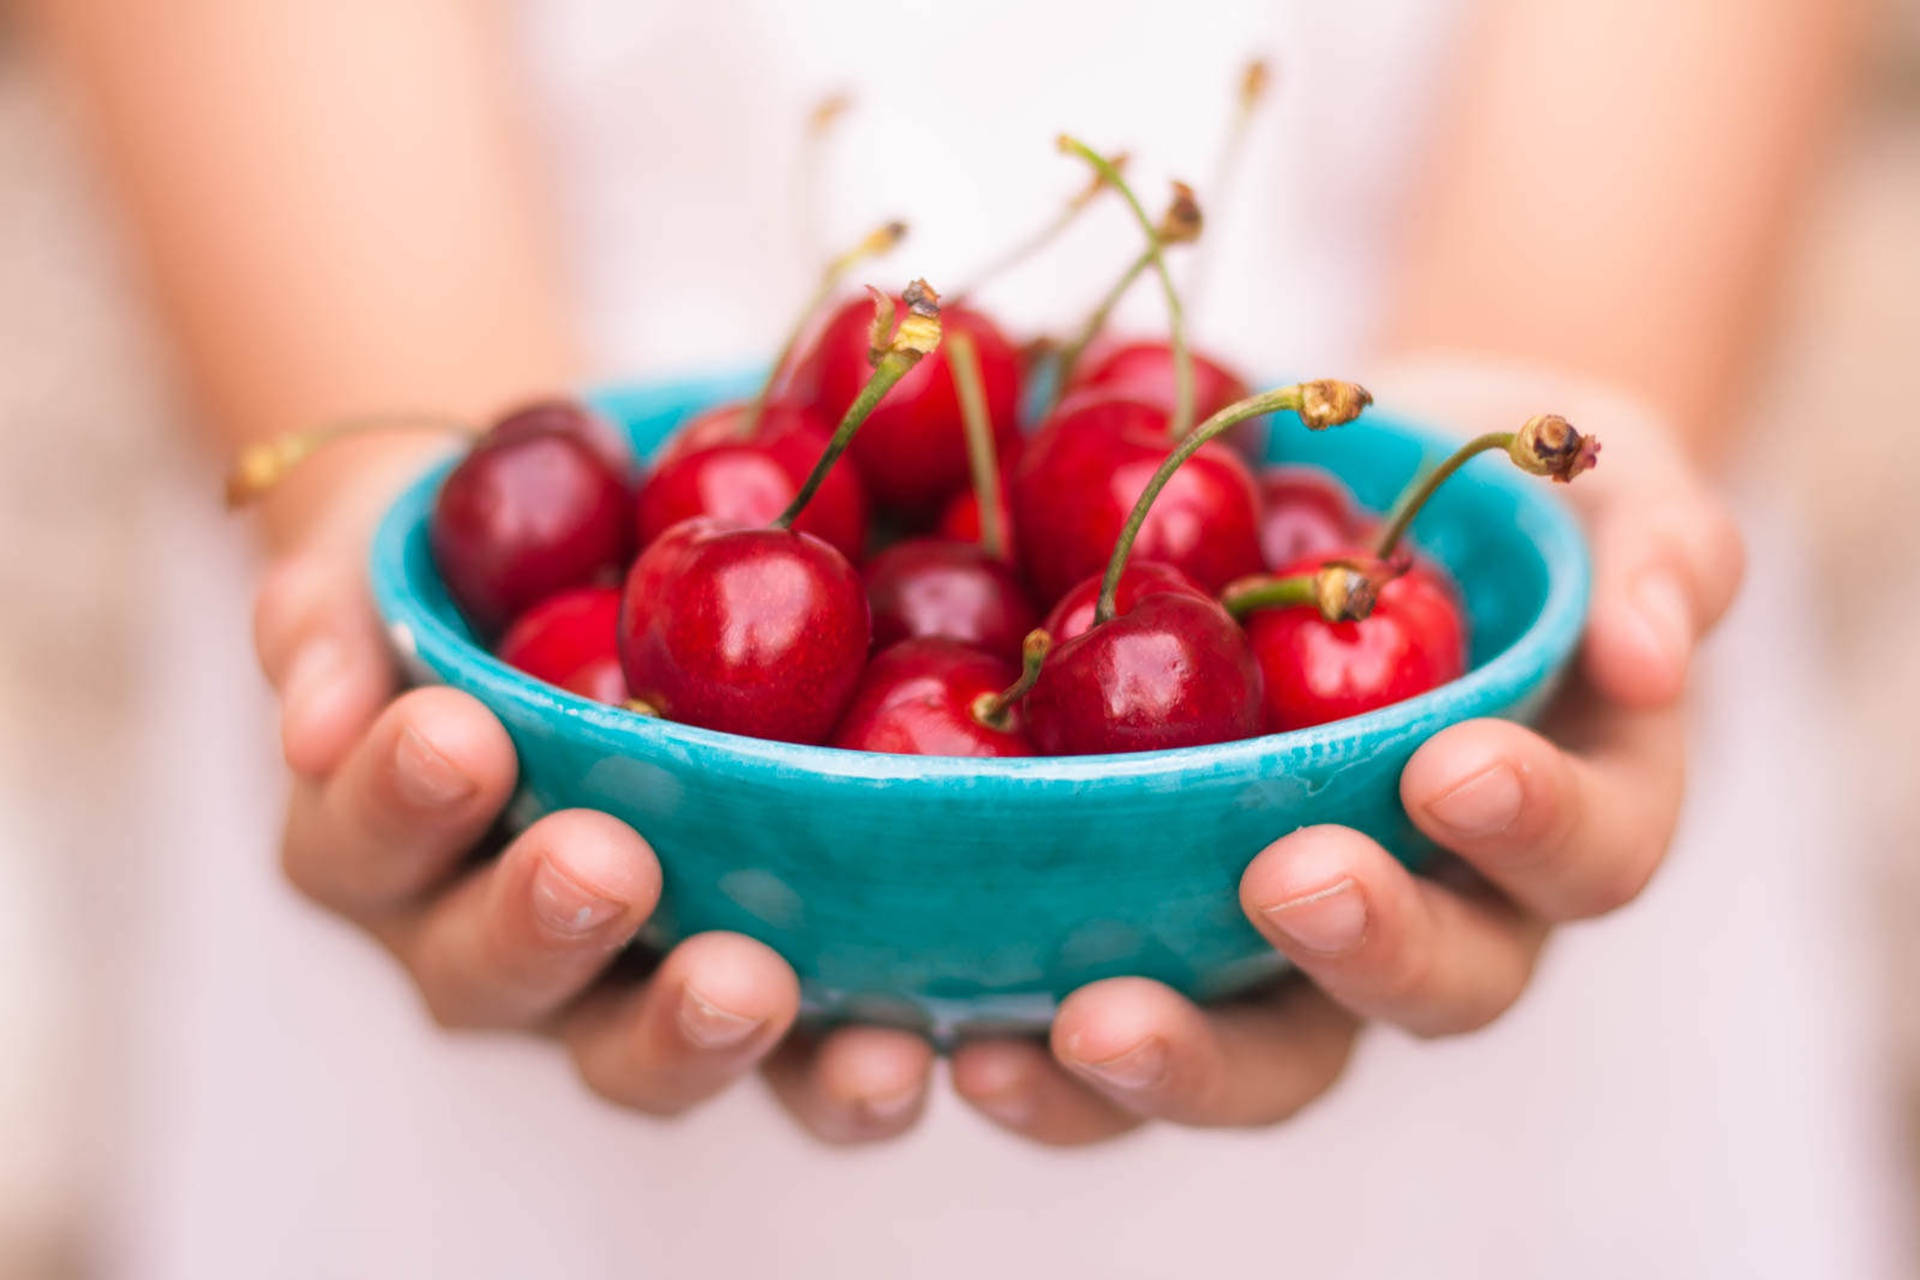 Hands Holding Bowl Of Cherries Background